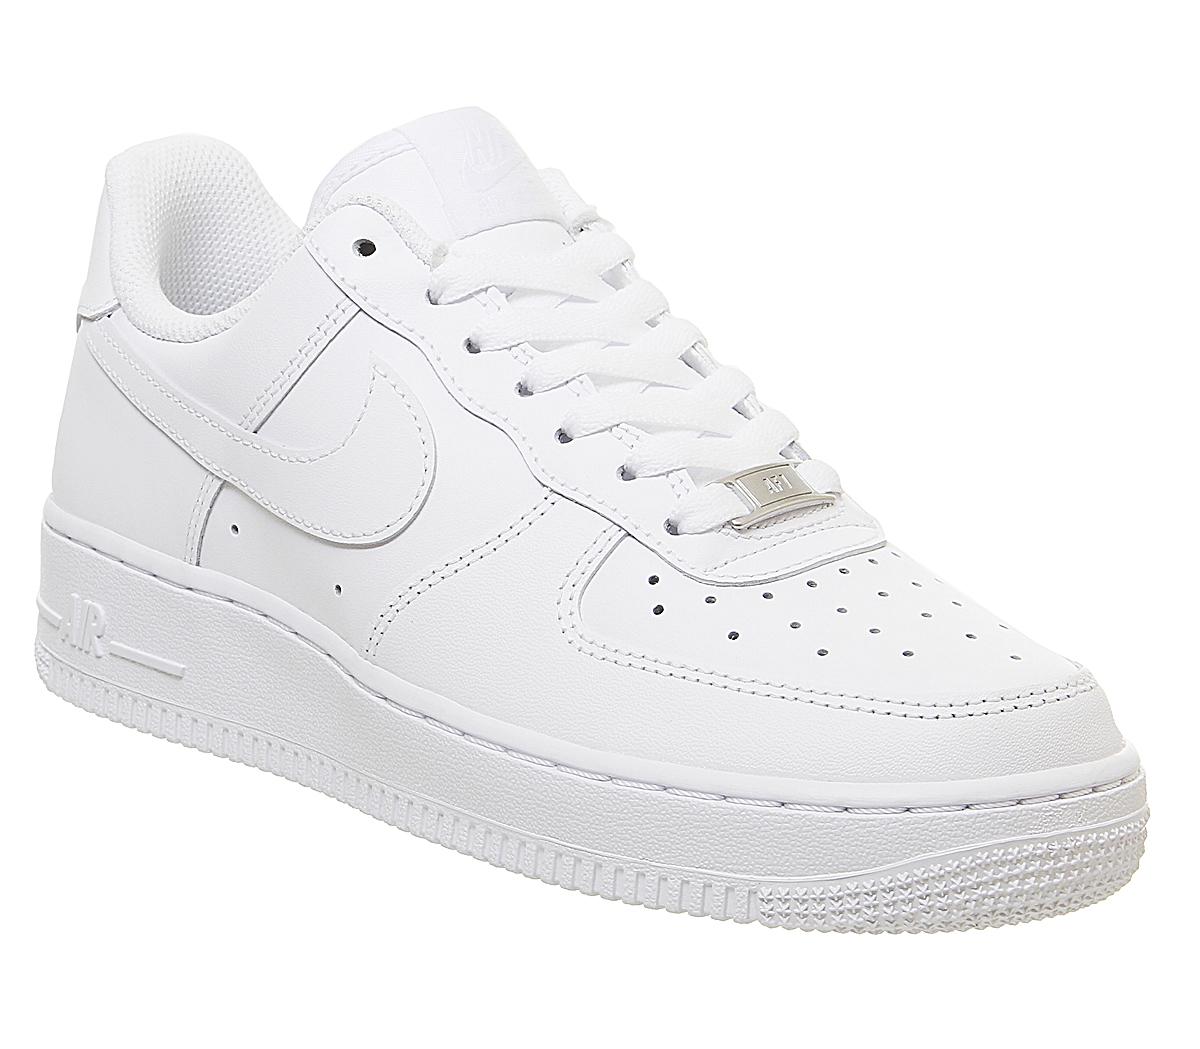 Nike Air Force 1 07 Trainers White - Hers trainers